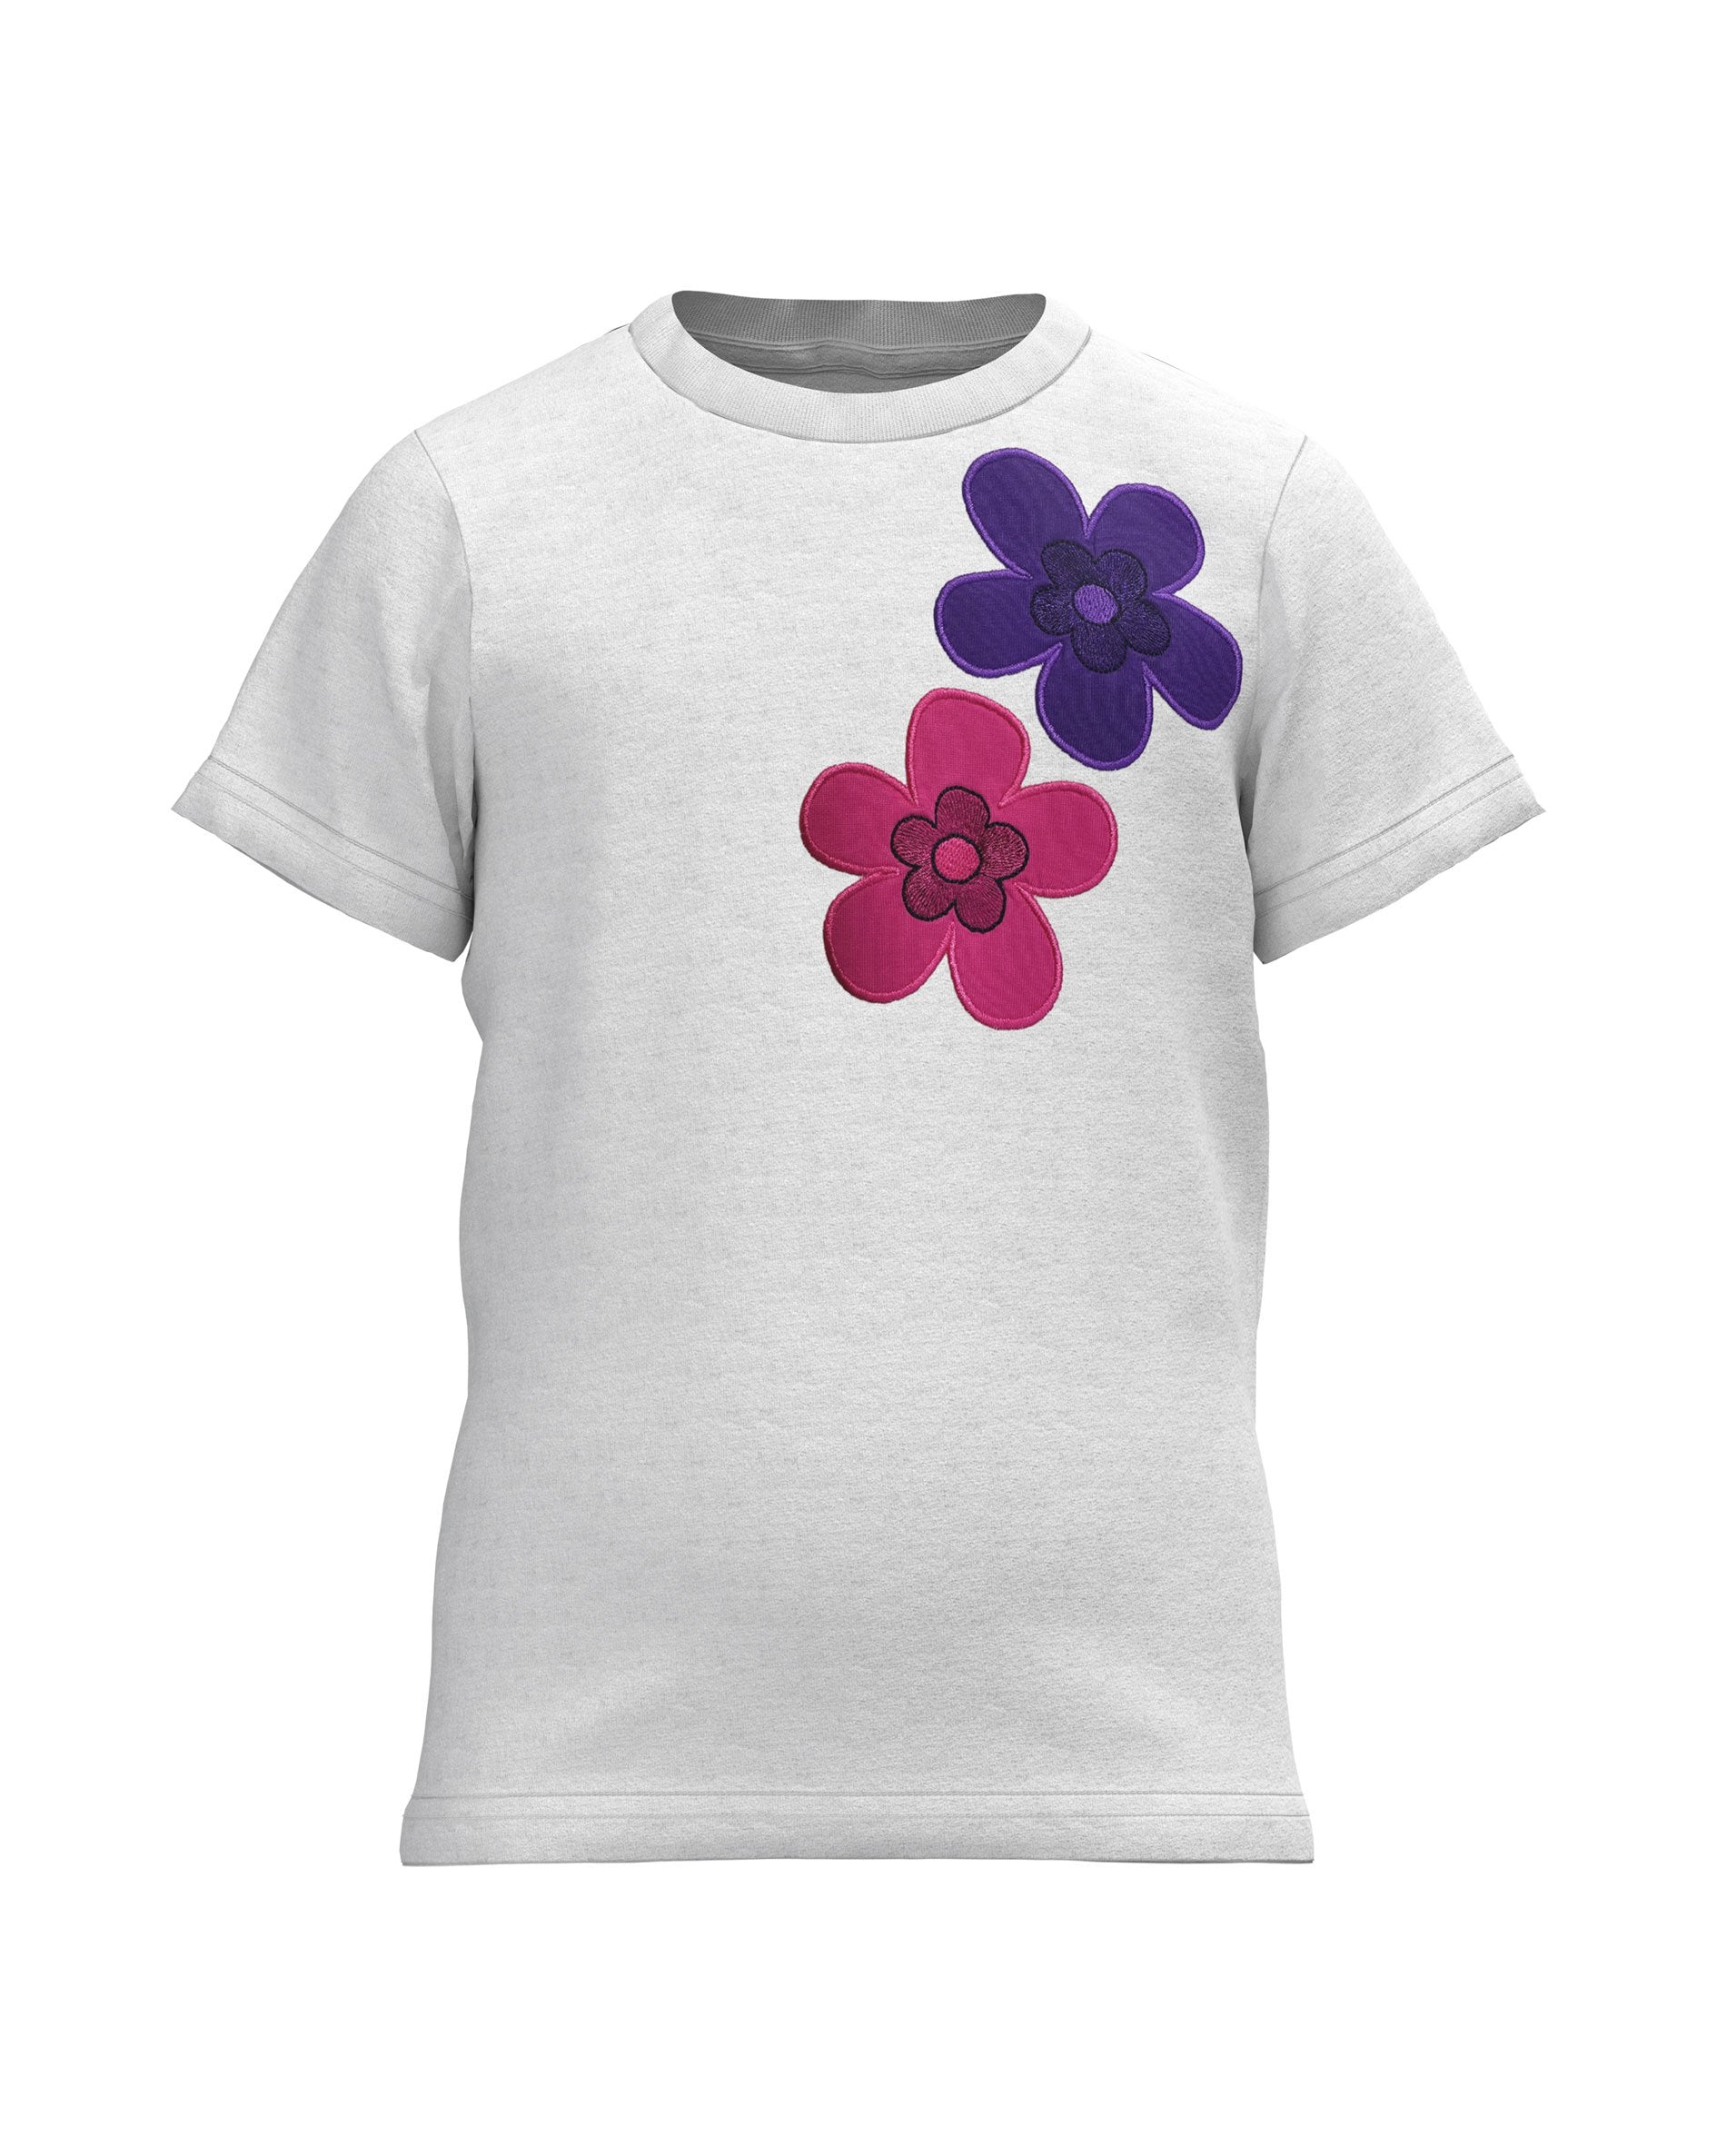 T-shirts Tops School – Girls Cotonly and